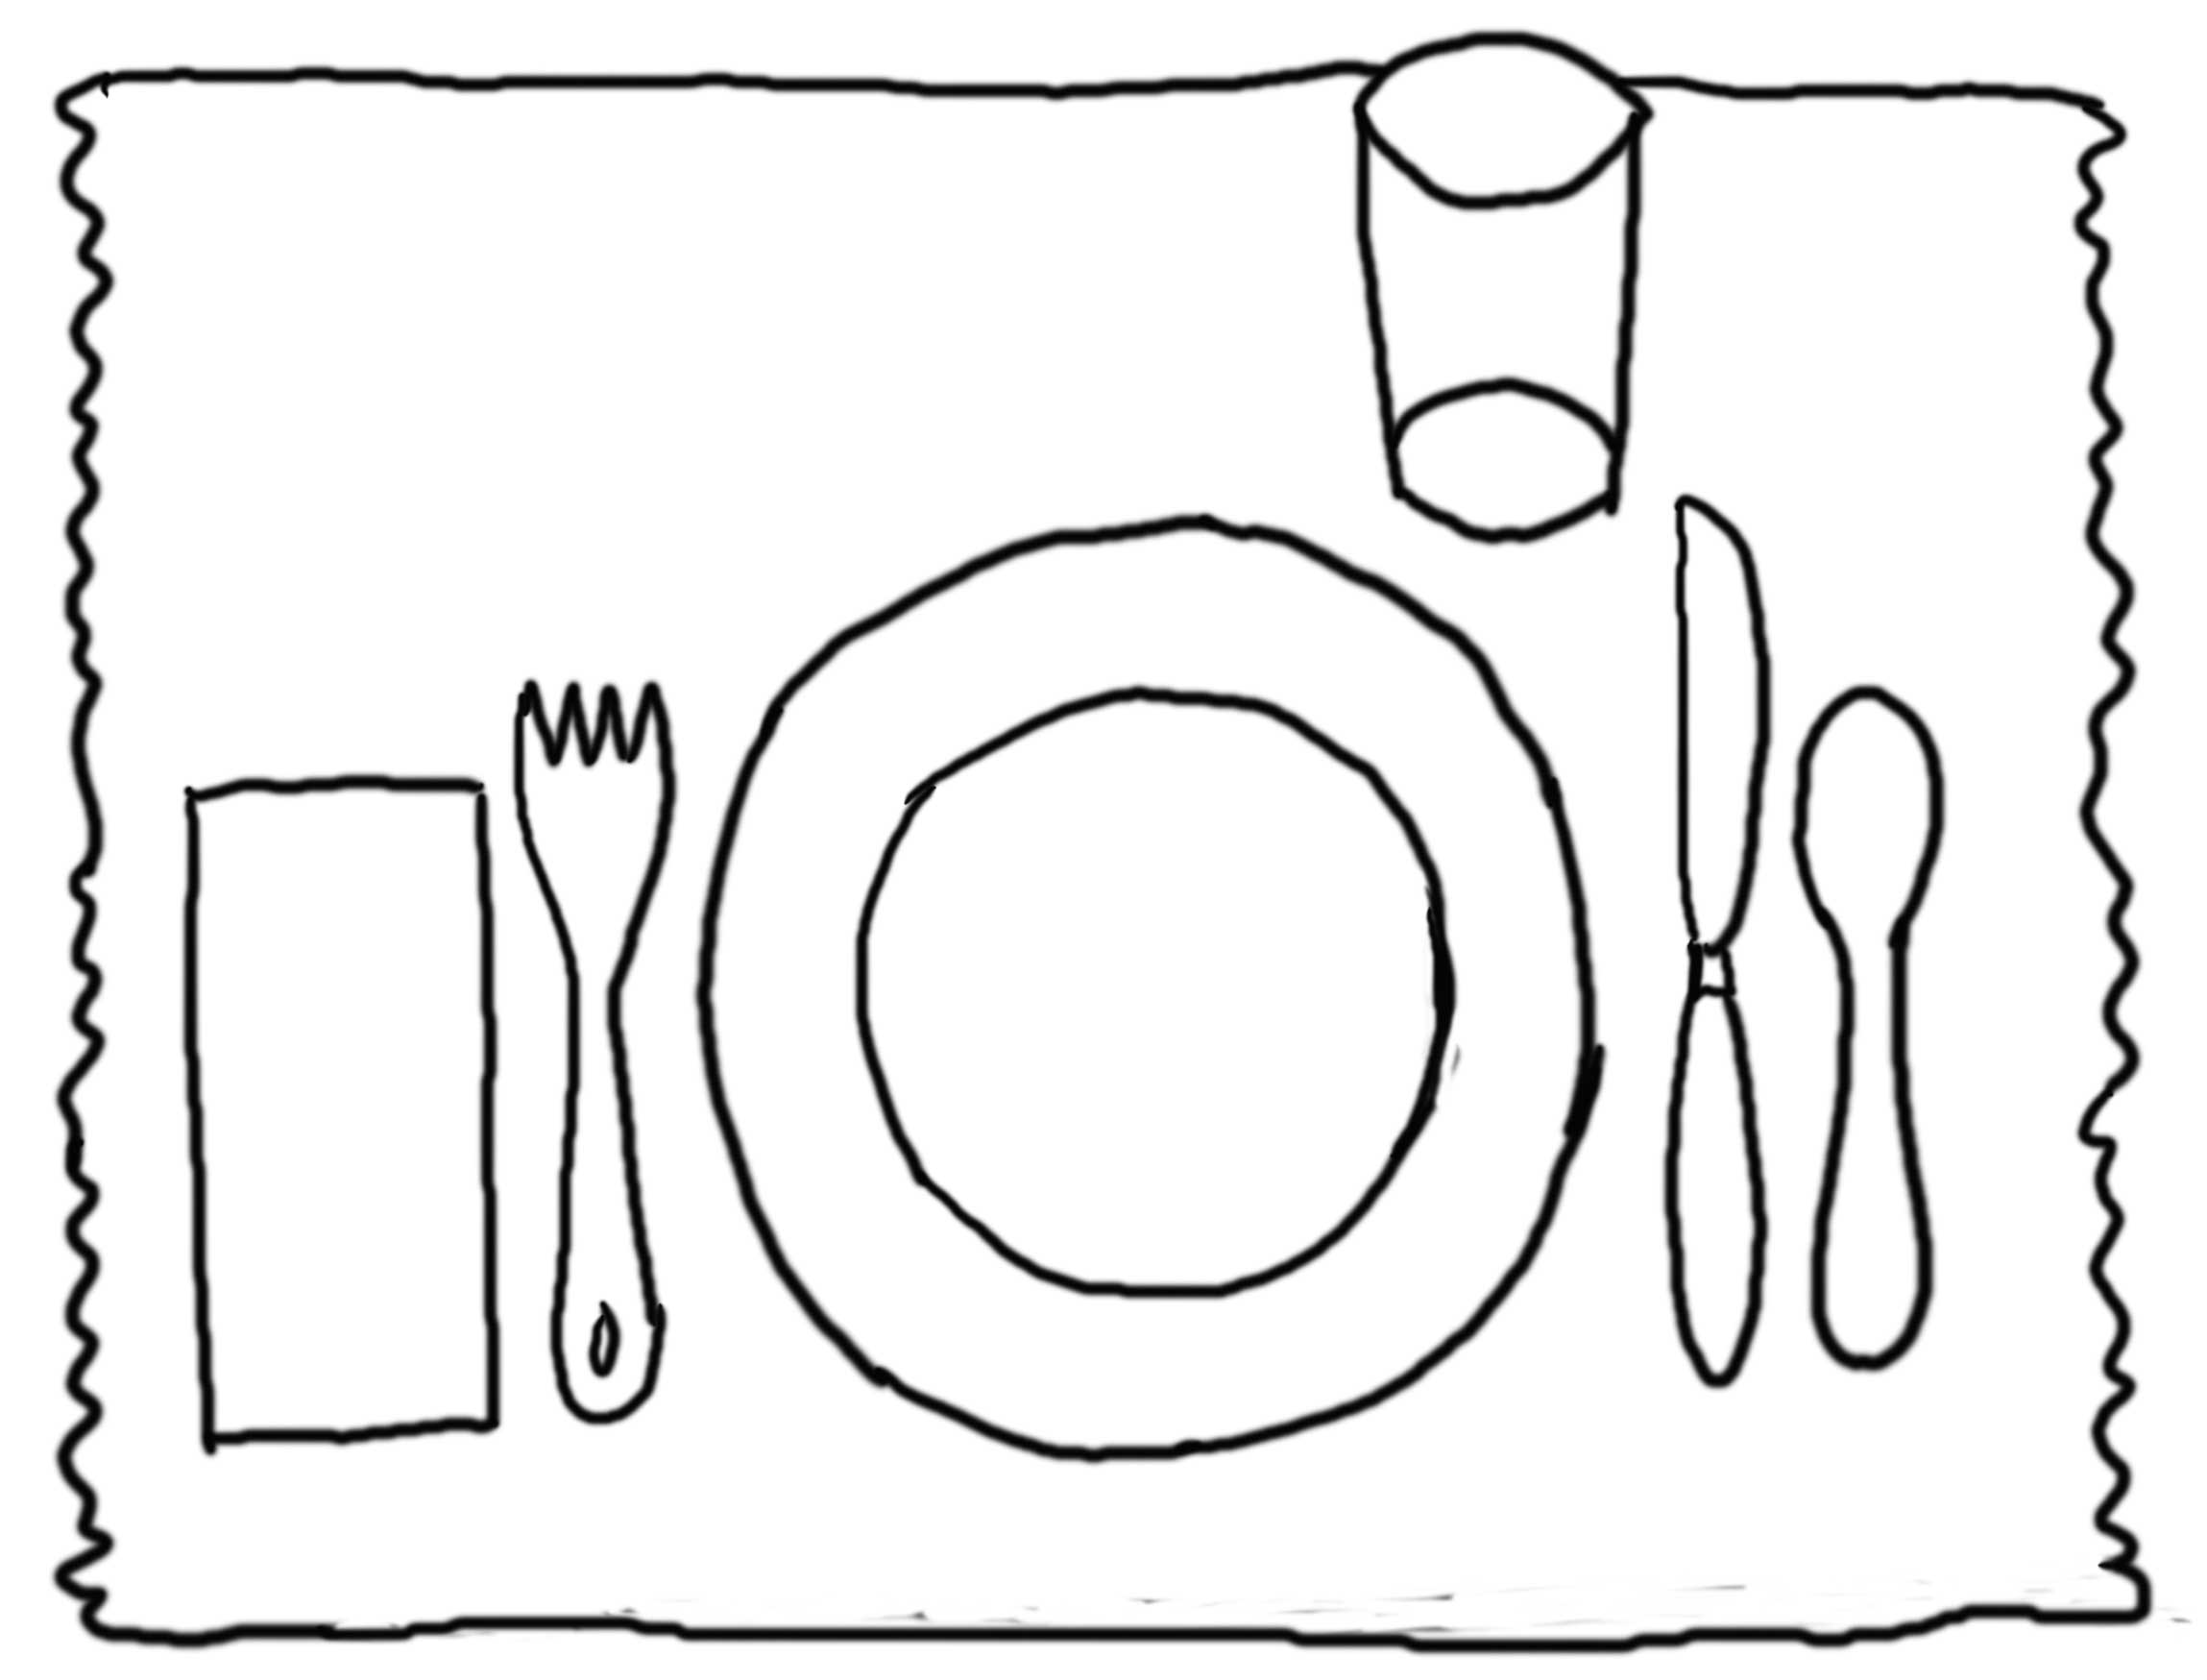 Placemat clipart - Clipground